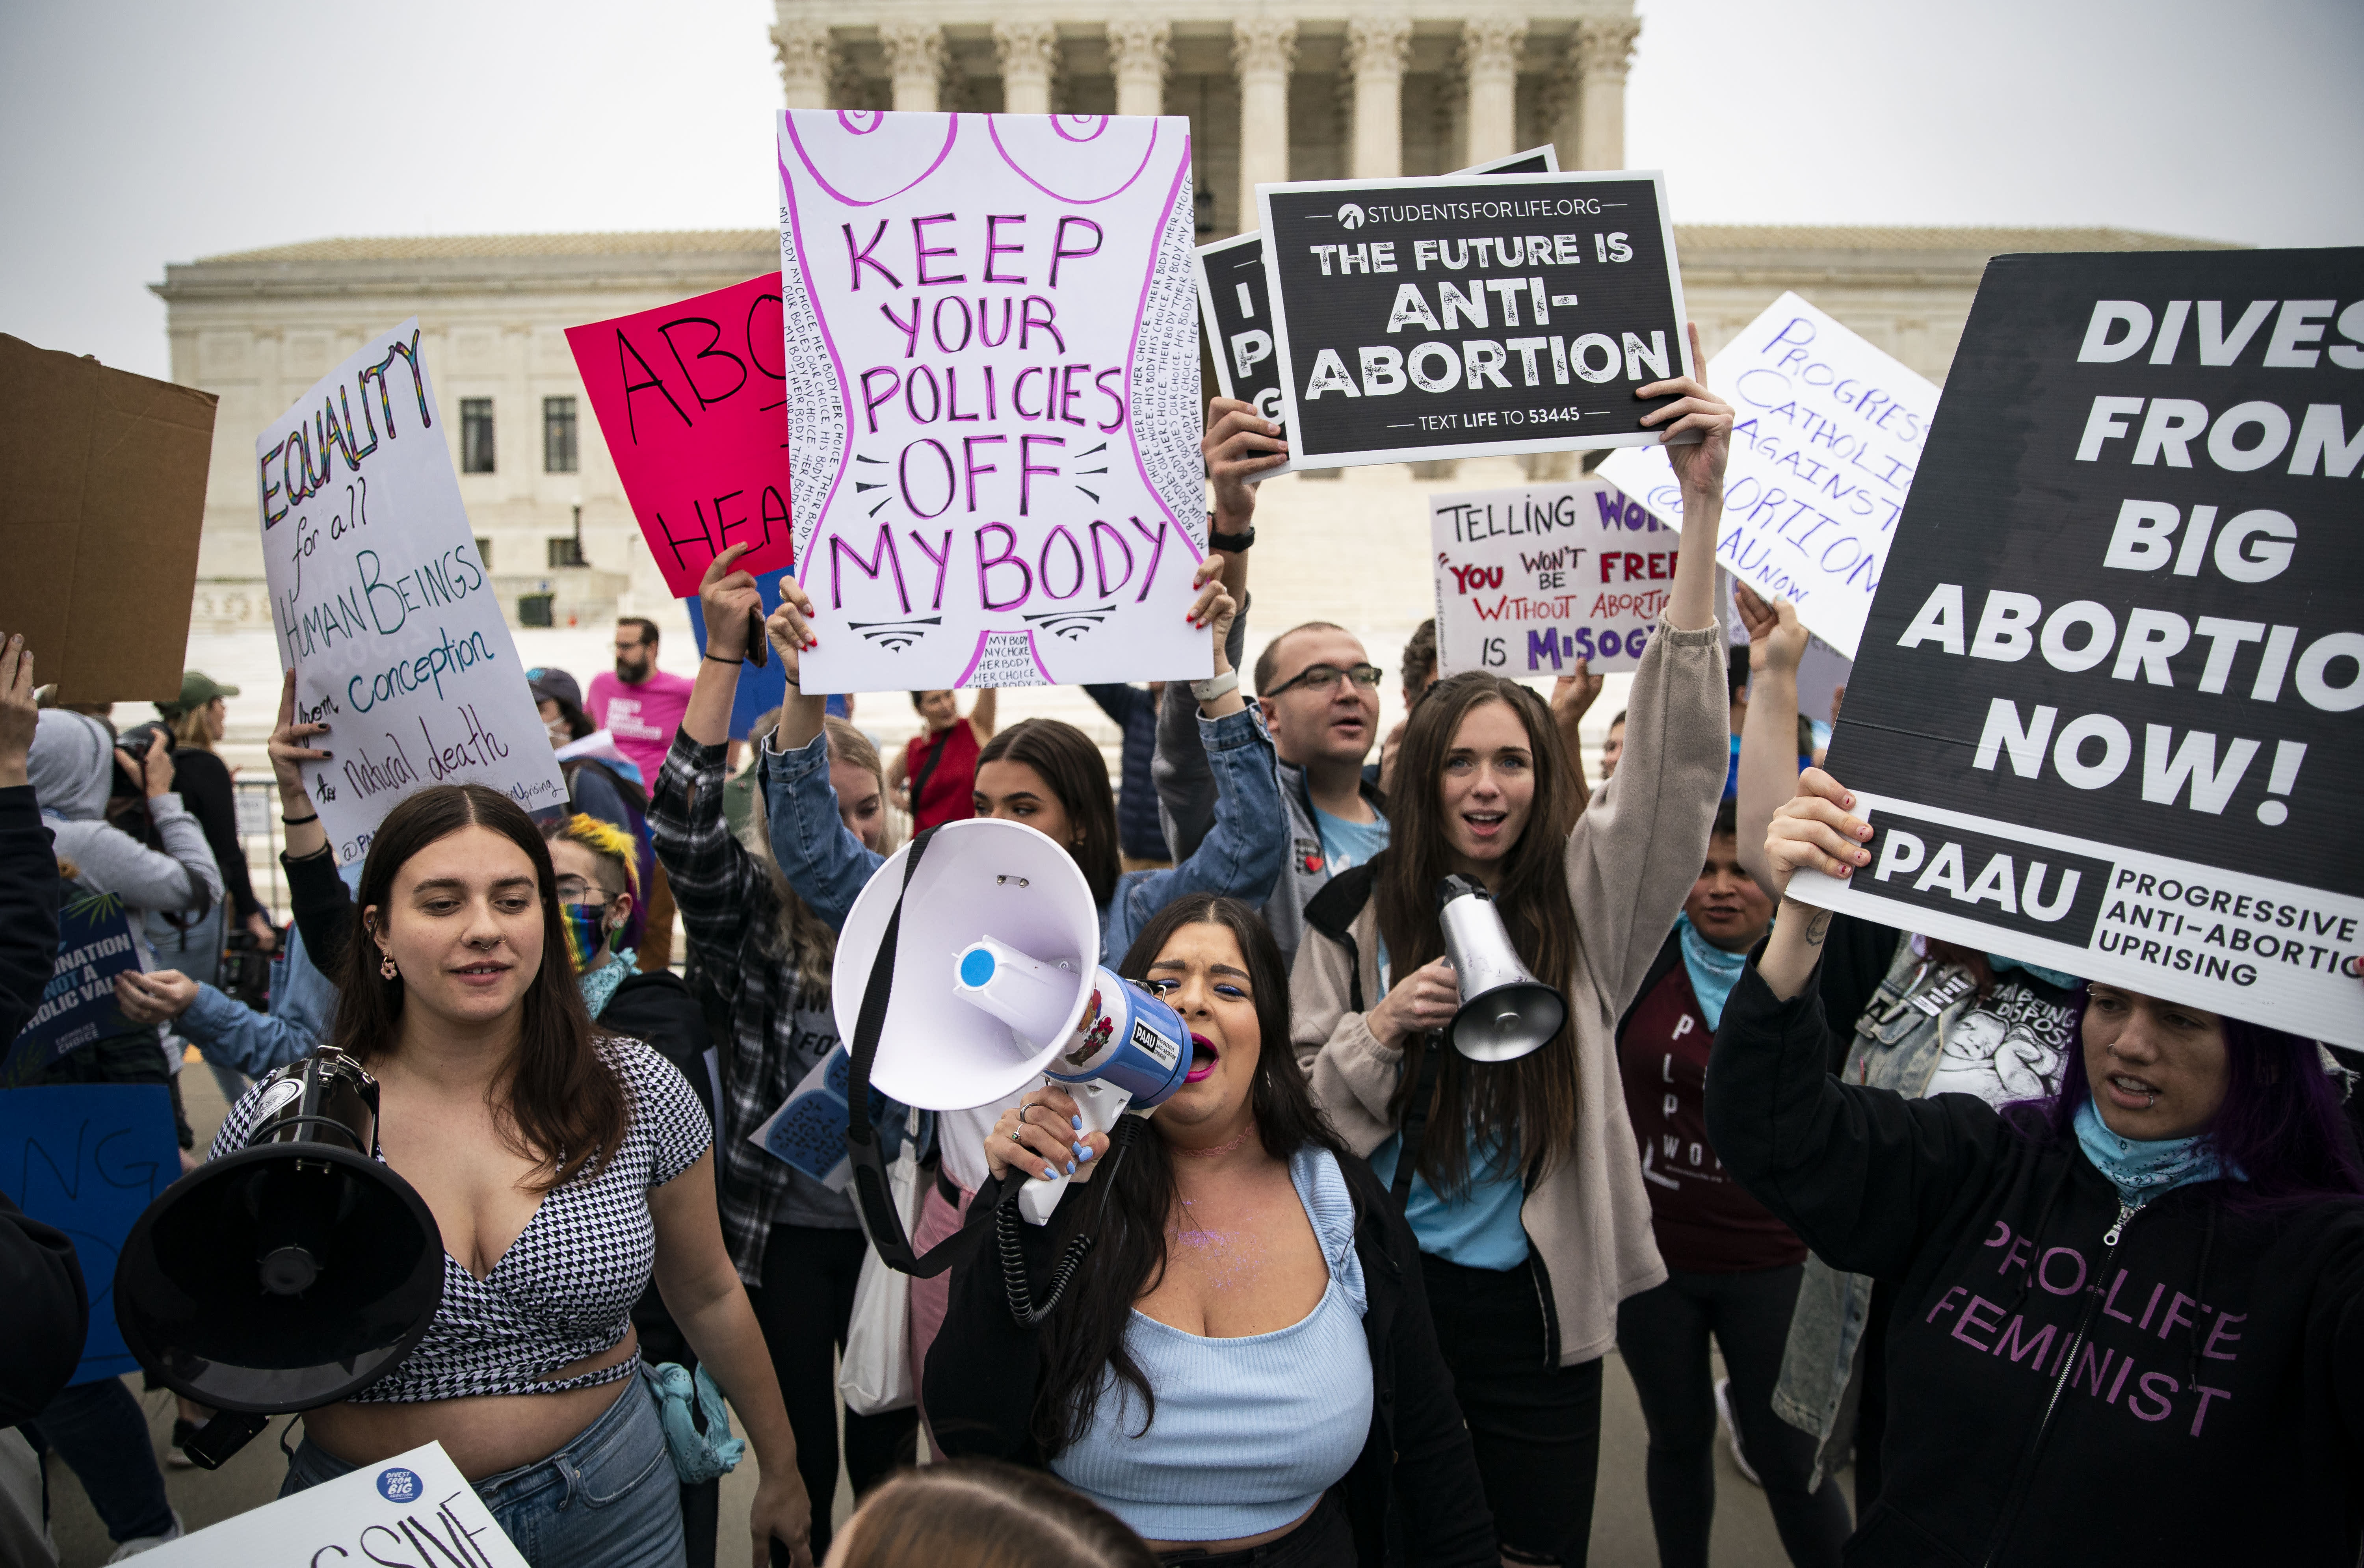 Protesters amass outside the Supreme Court after leaked doc suggests justices to overturn Roe v. Wade